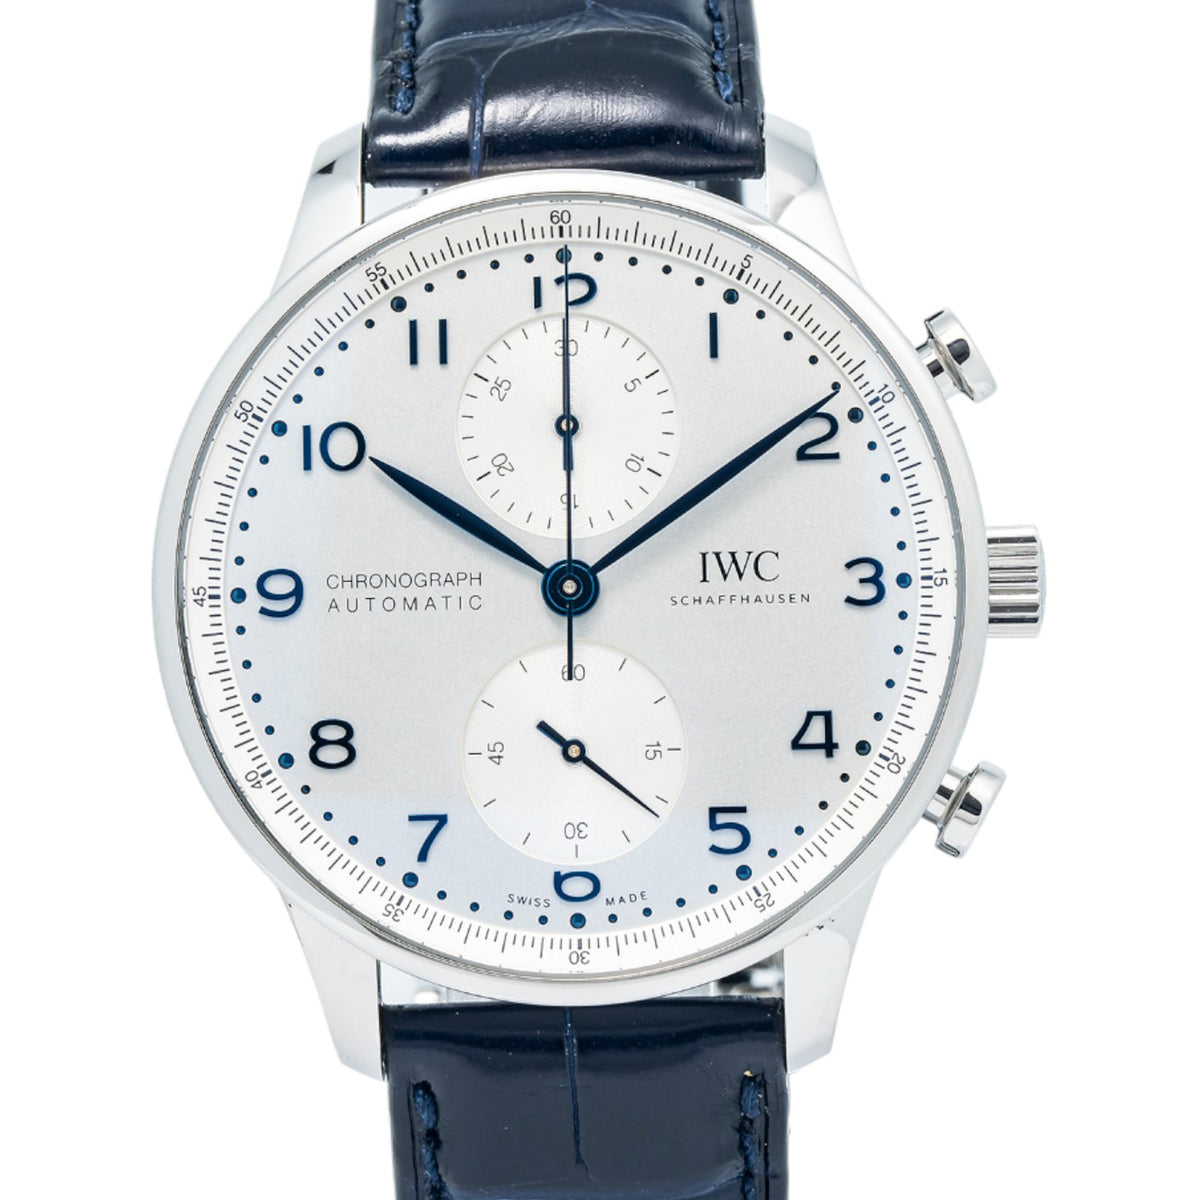 IWC Portugieser Chronograph IW371605 Stainless Steel Automatic Men's Watch 41mm